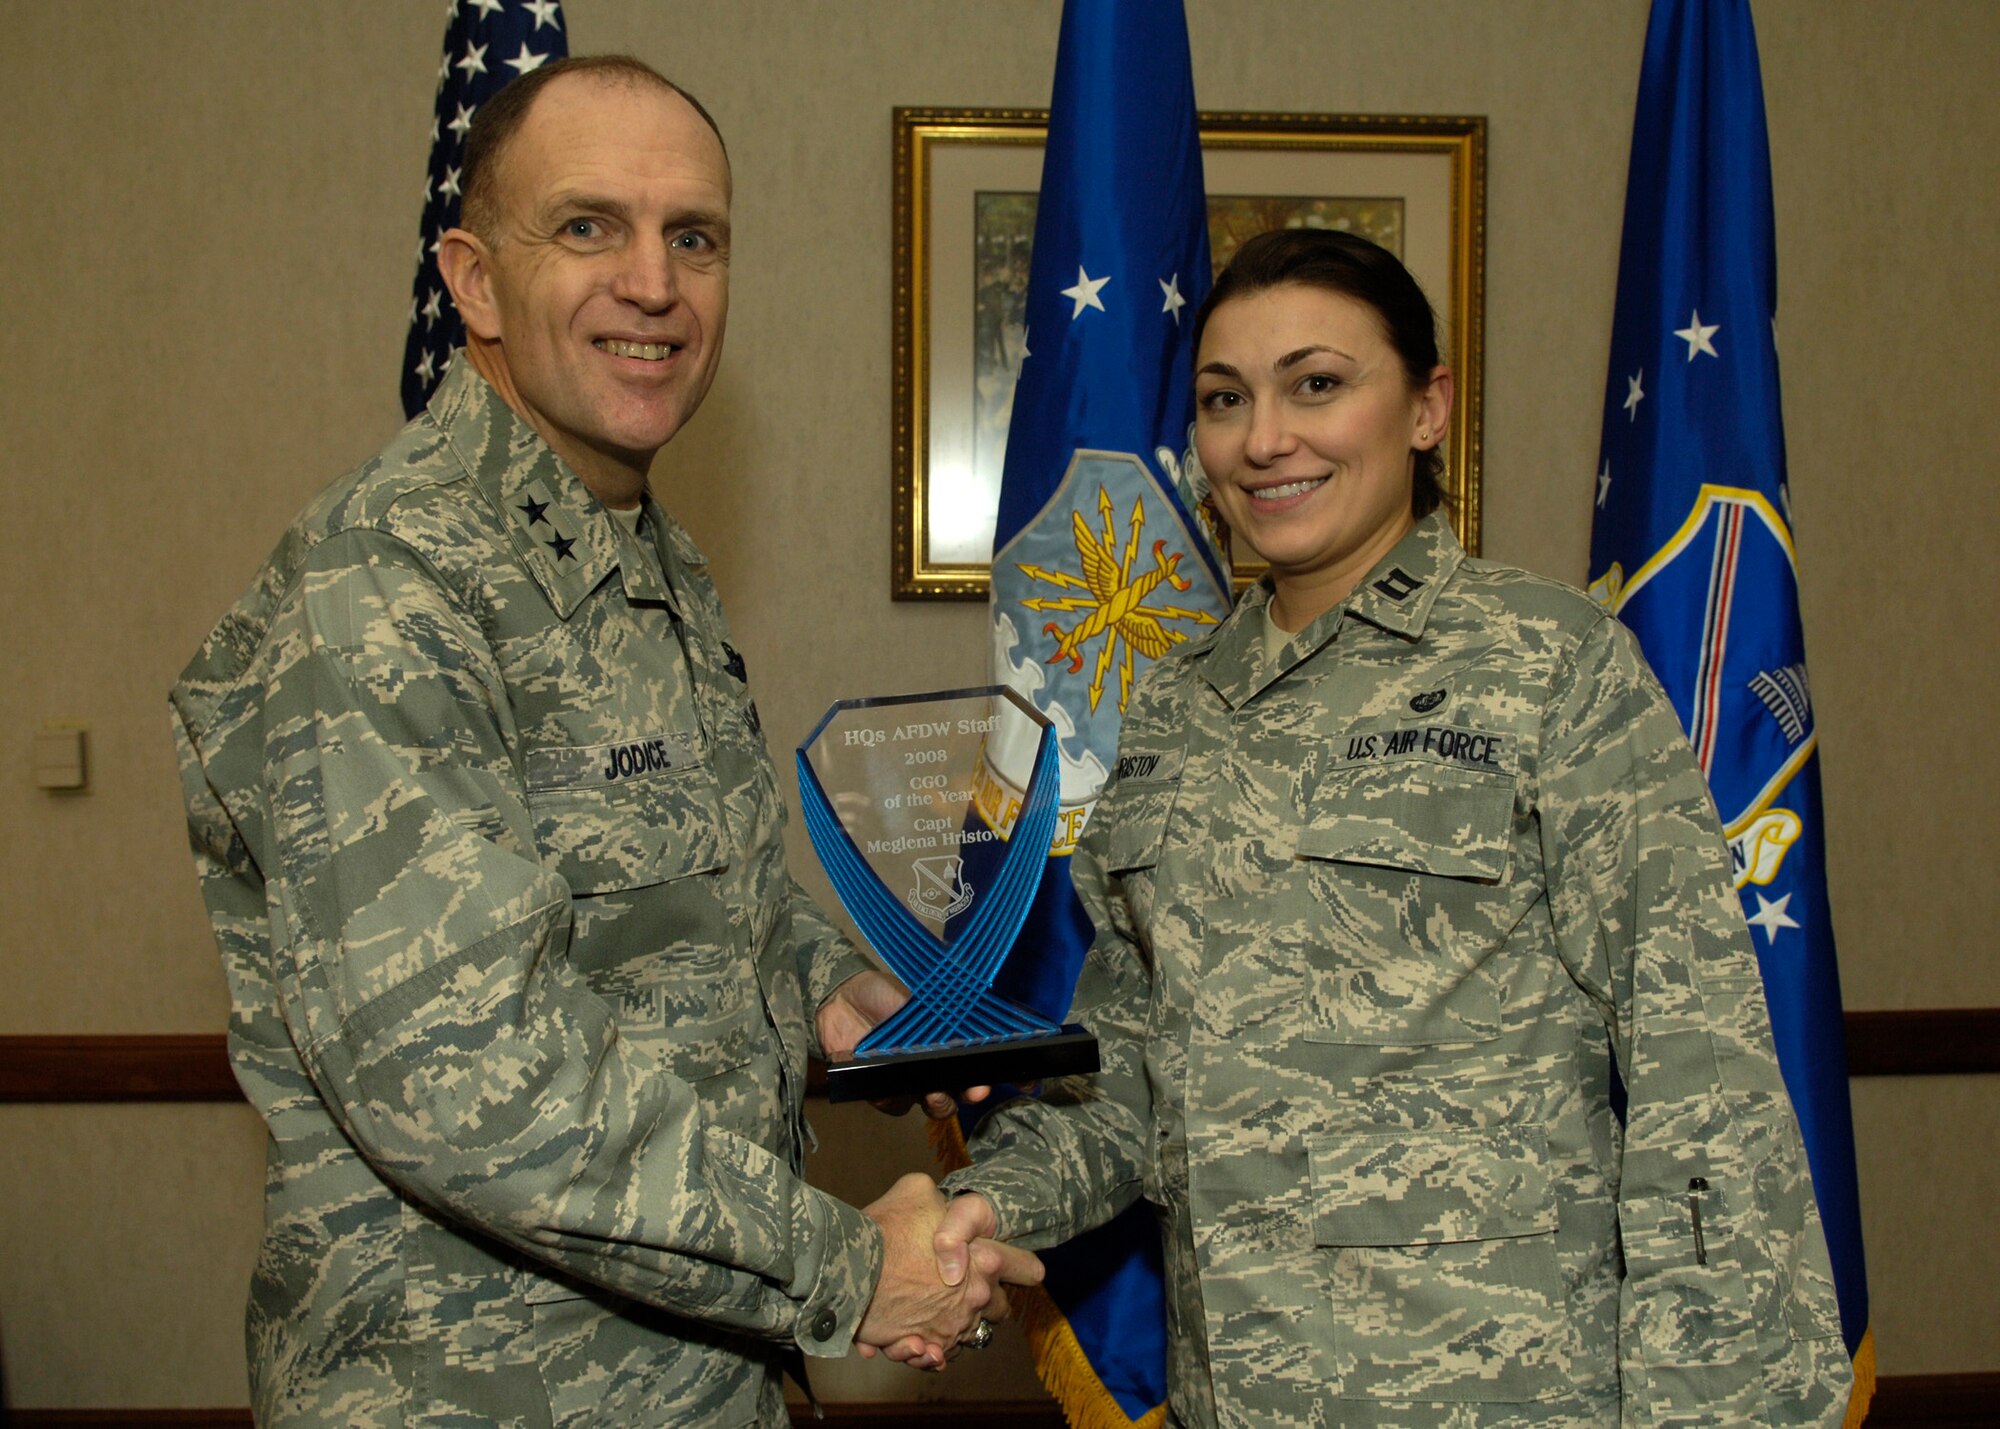 Maj. Gen. Ralph Jodice, Air Force District of Washington commander, presents the 2008 AFDW Company Grade Officer of the Year award to Capt. Meglena Hristov, AFDW Assistant Staff Judge Advocate. The award was presented Feb. 25 at The Club on Andrews Air Force Base, Md. 